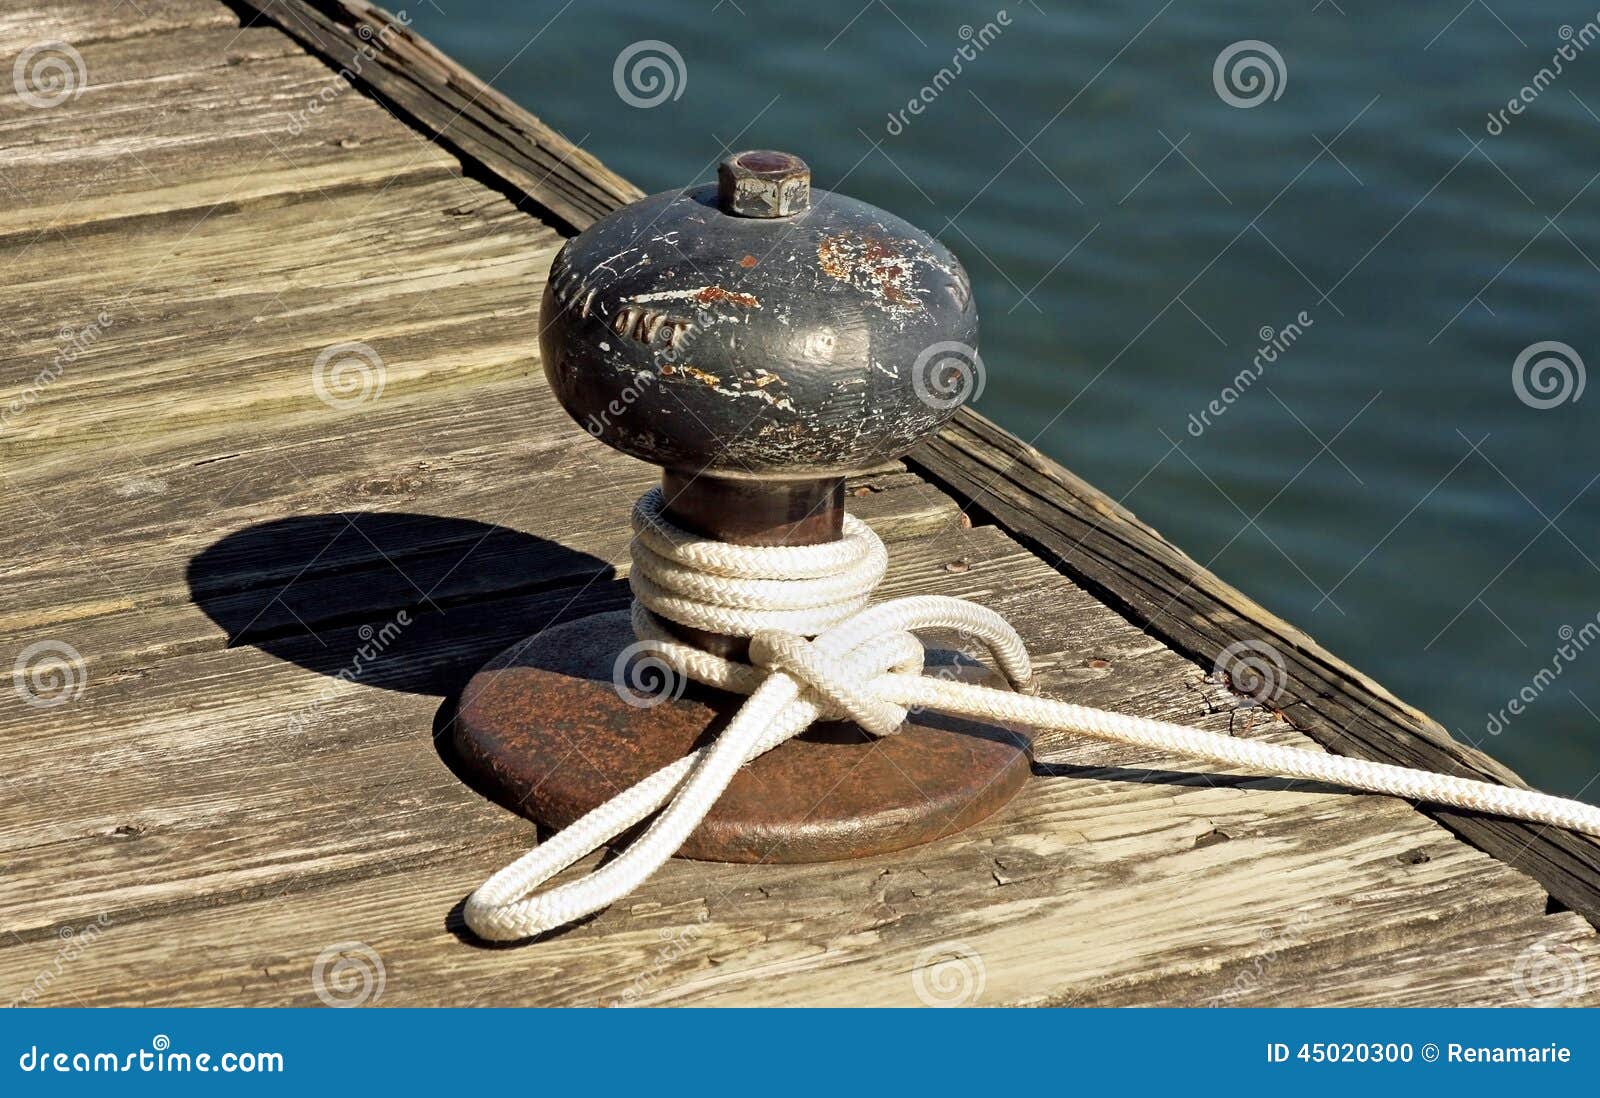 Rope stock photo. Image of moored, attached, knotted ...